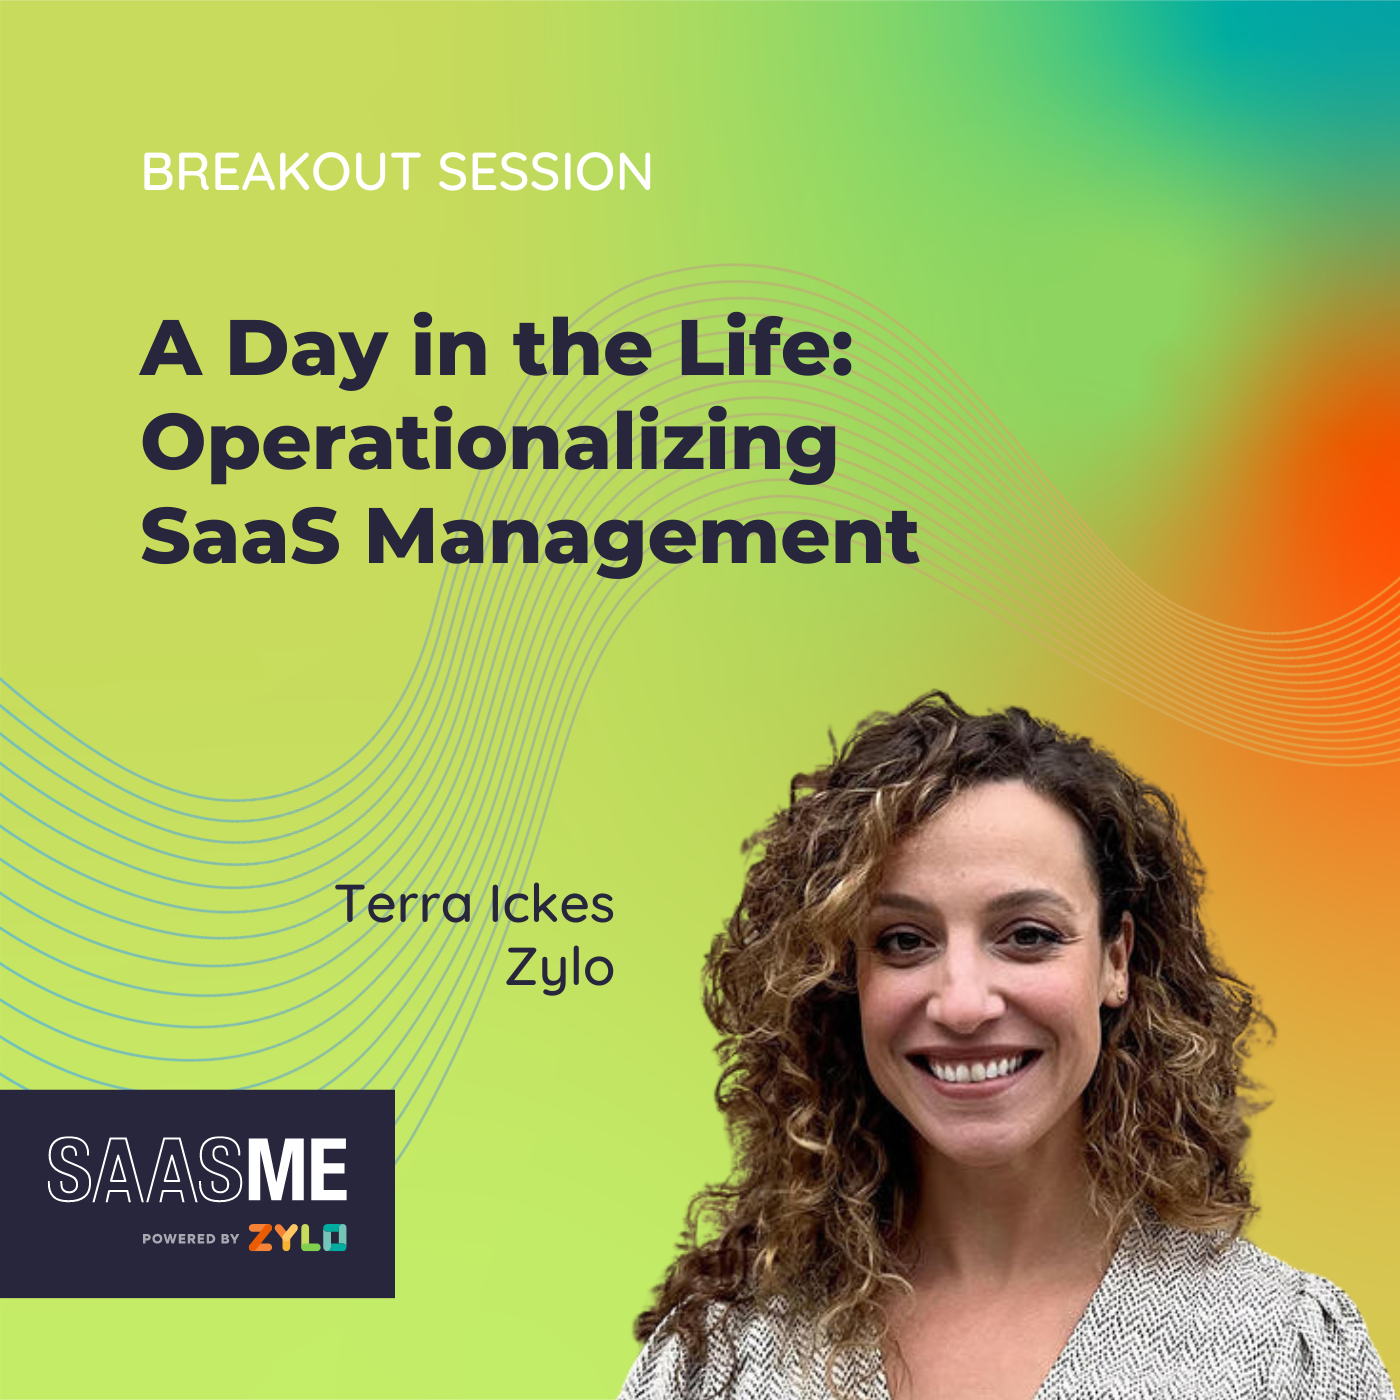 A Day in the Life: Operationalizing SaaS Management